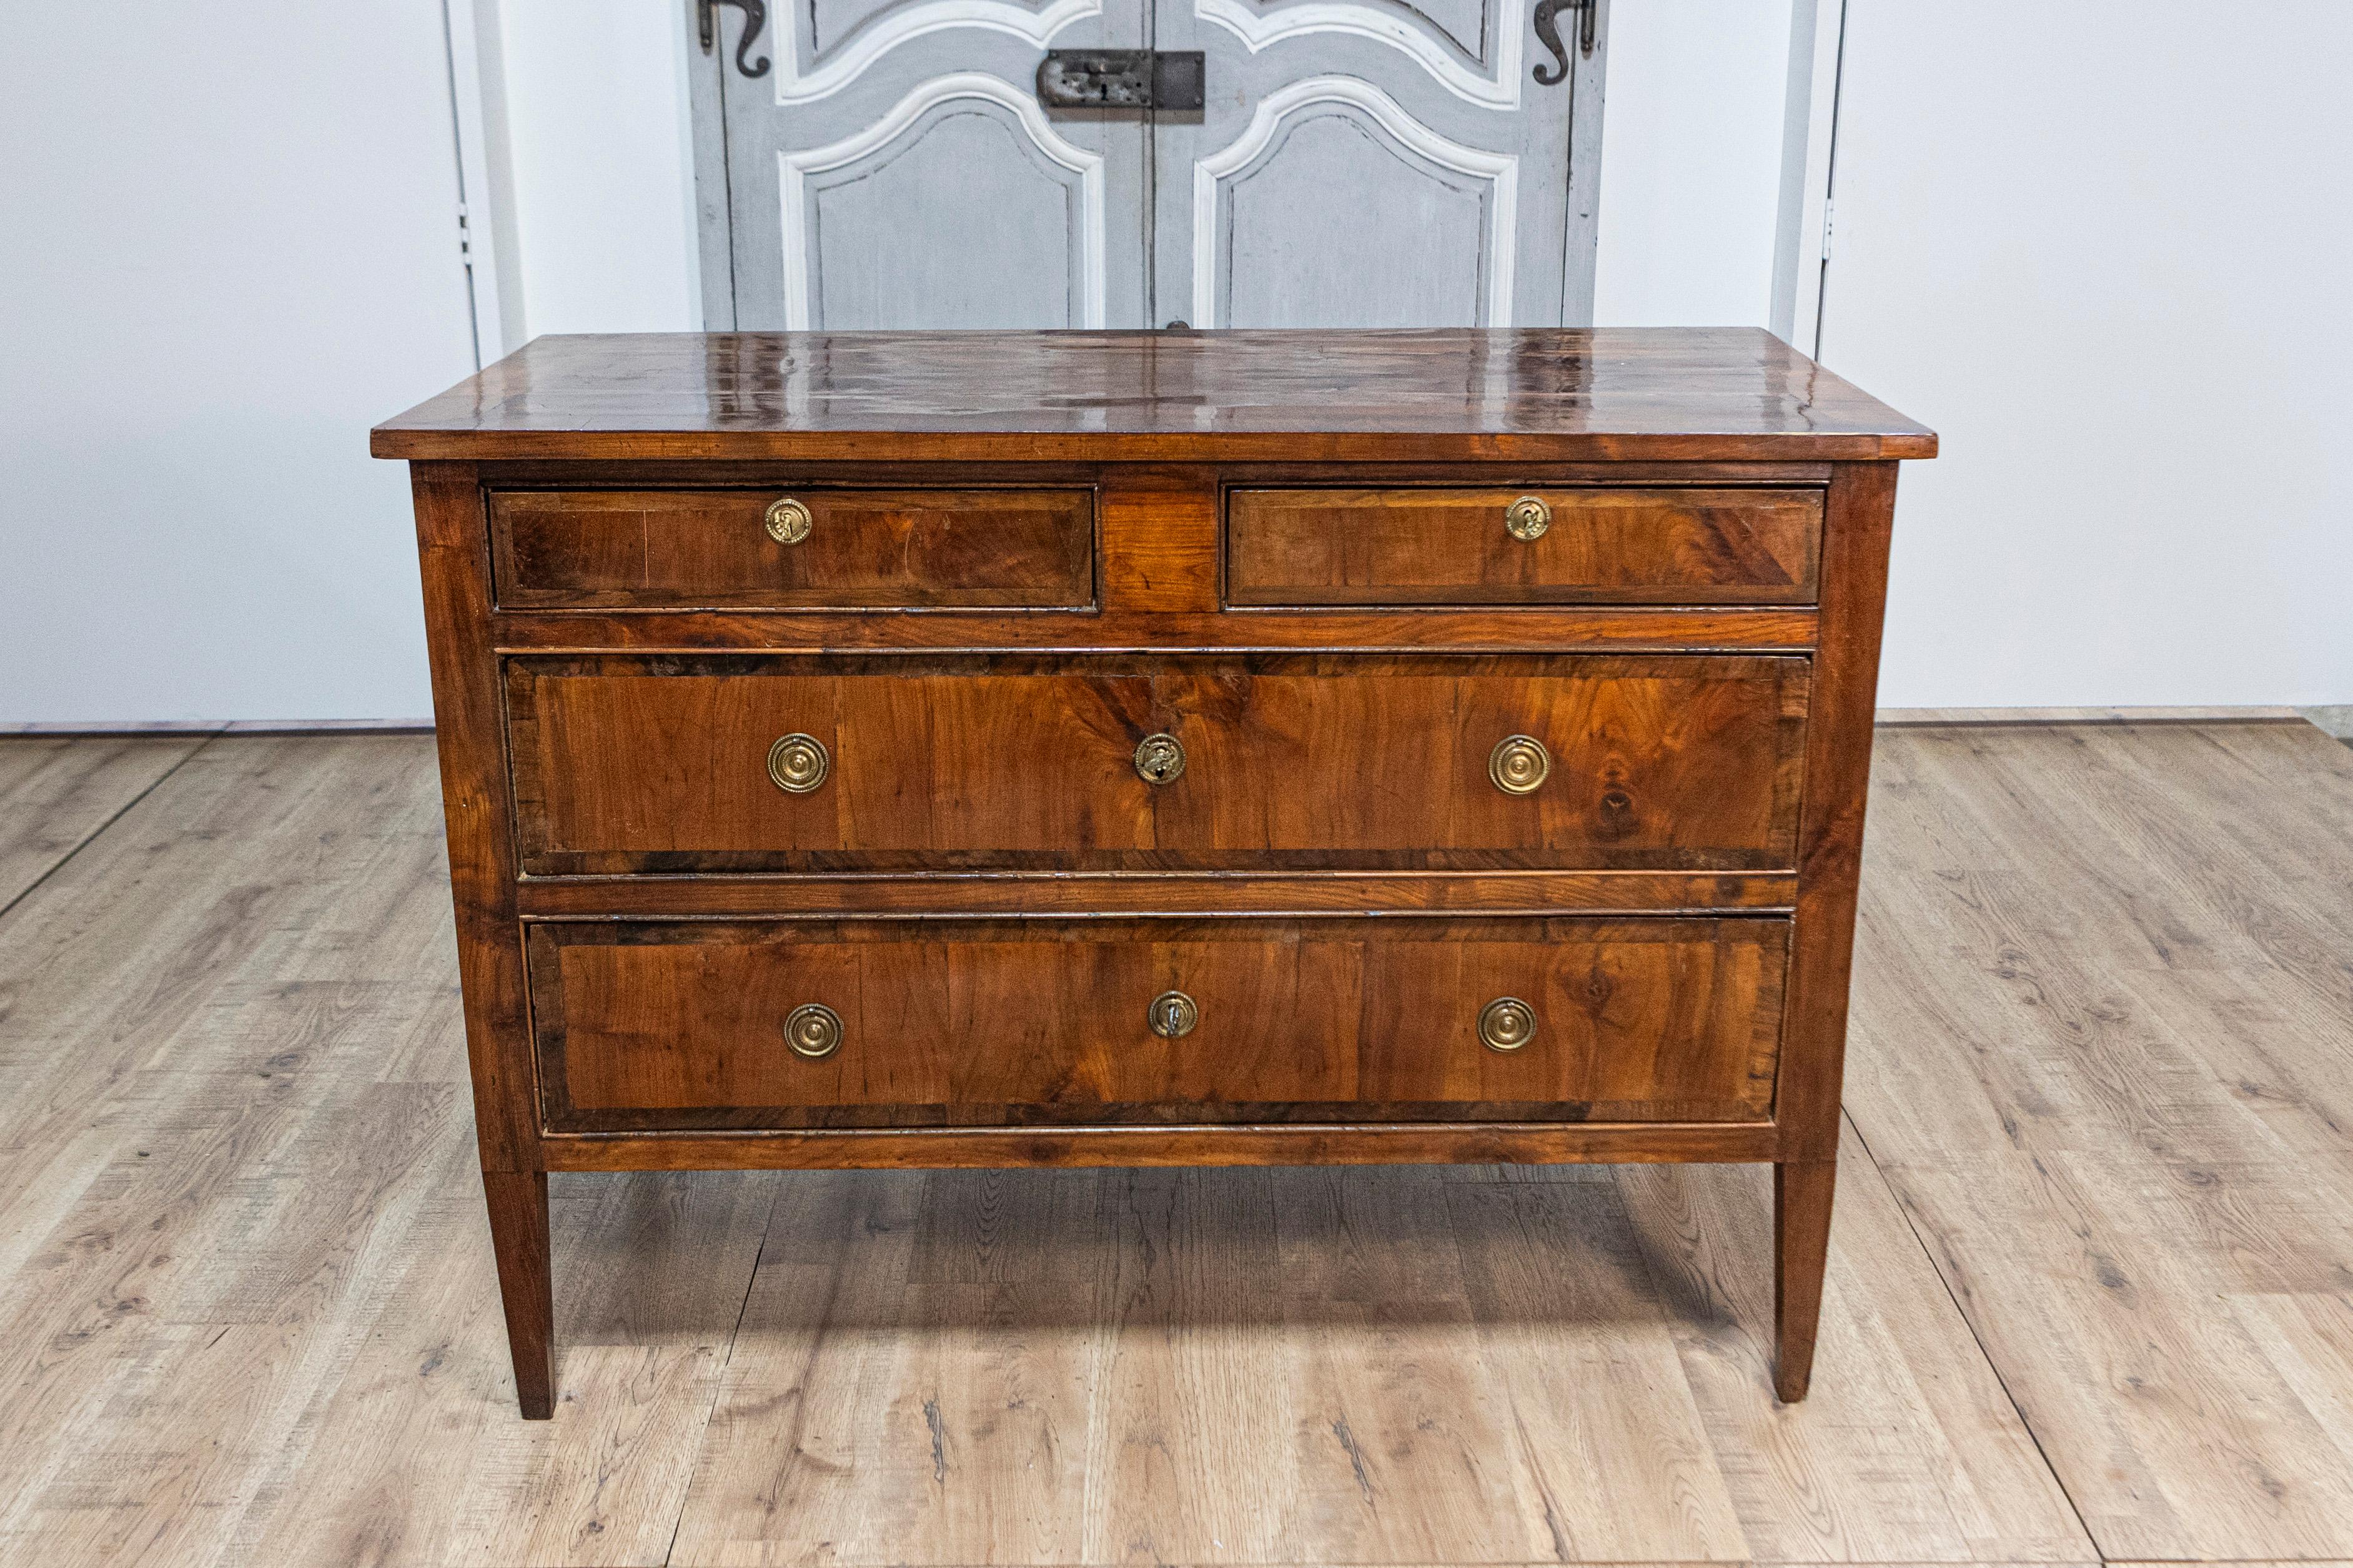 Italian Neoclassical Period 18th Century Walnut Commode with Four Drawers For Sale 7